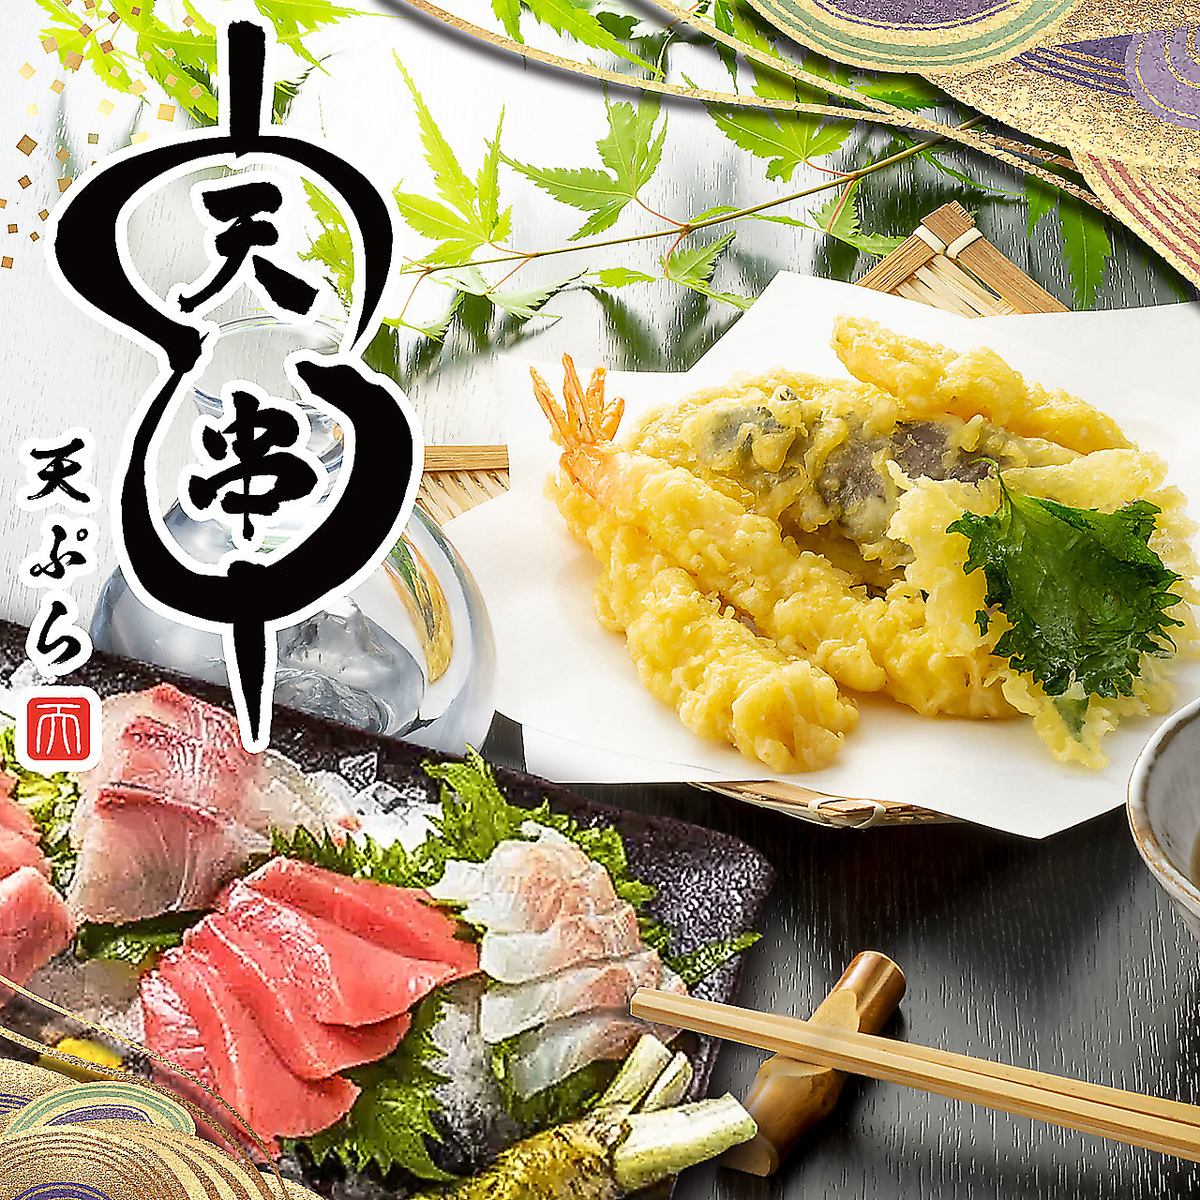 Enjoy seasonal fresh fish, Japanese sake, and wine! There are many all-you-can-drink courses.